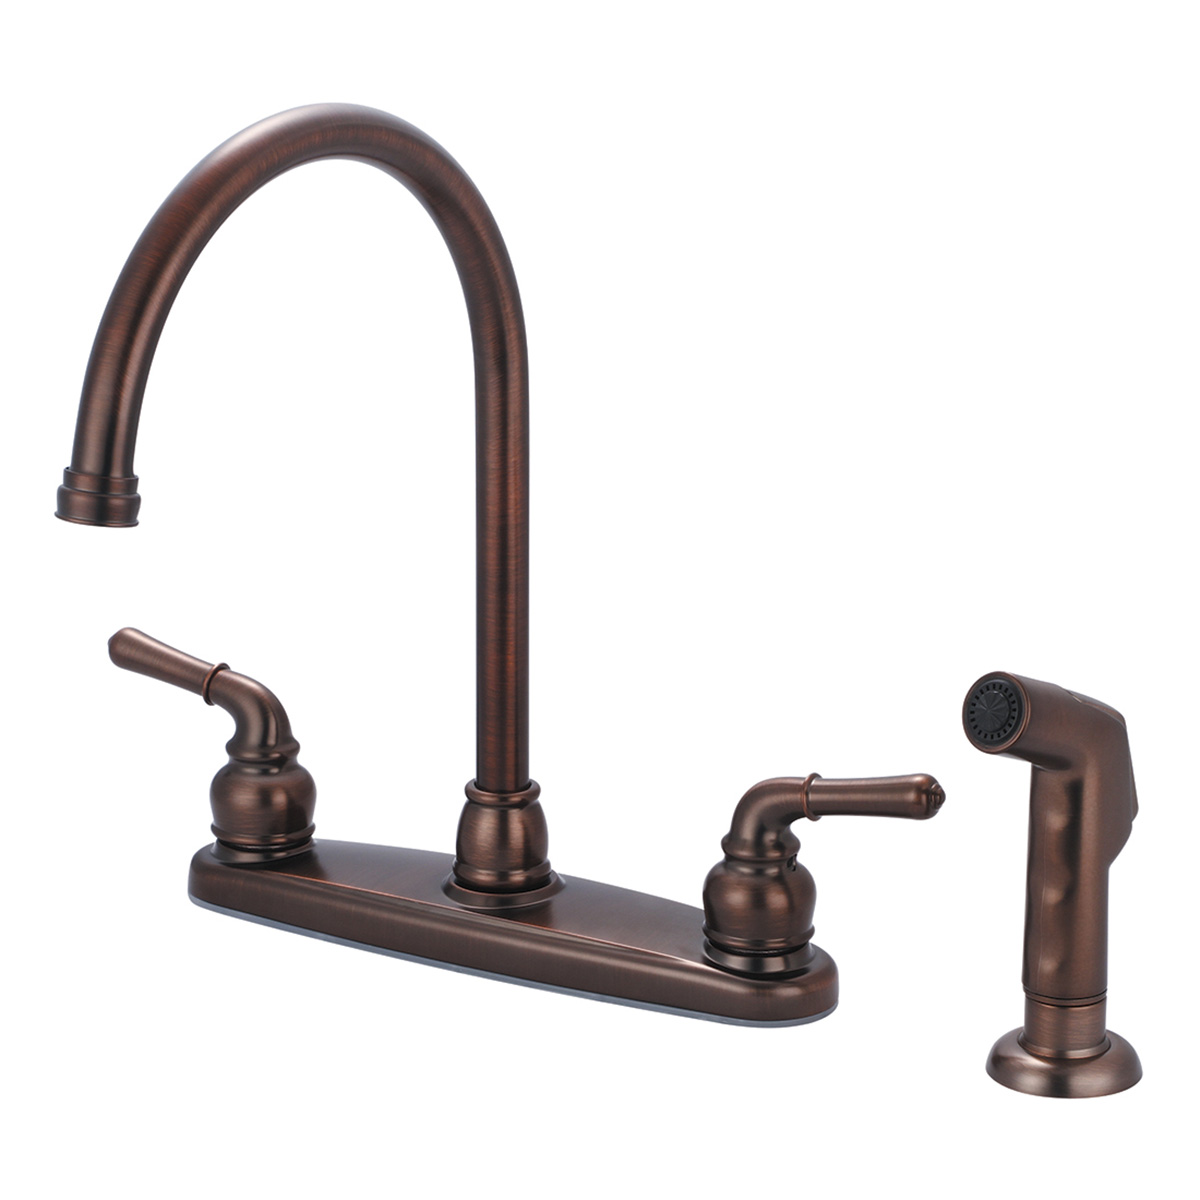 K-5342-orb Two Handle Kitchen Faucet - Oil Rubbed Bronze